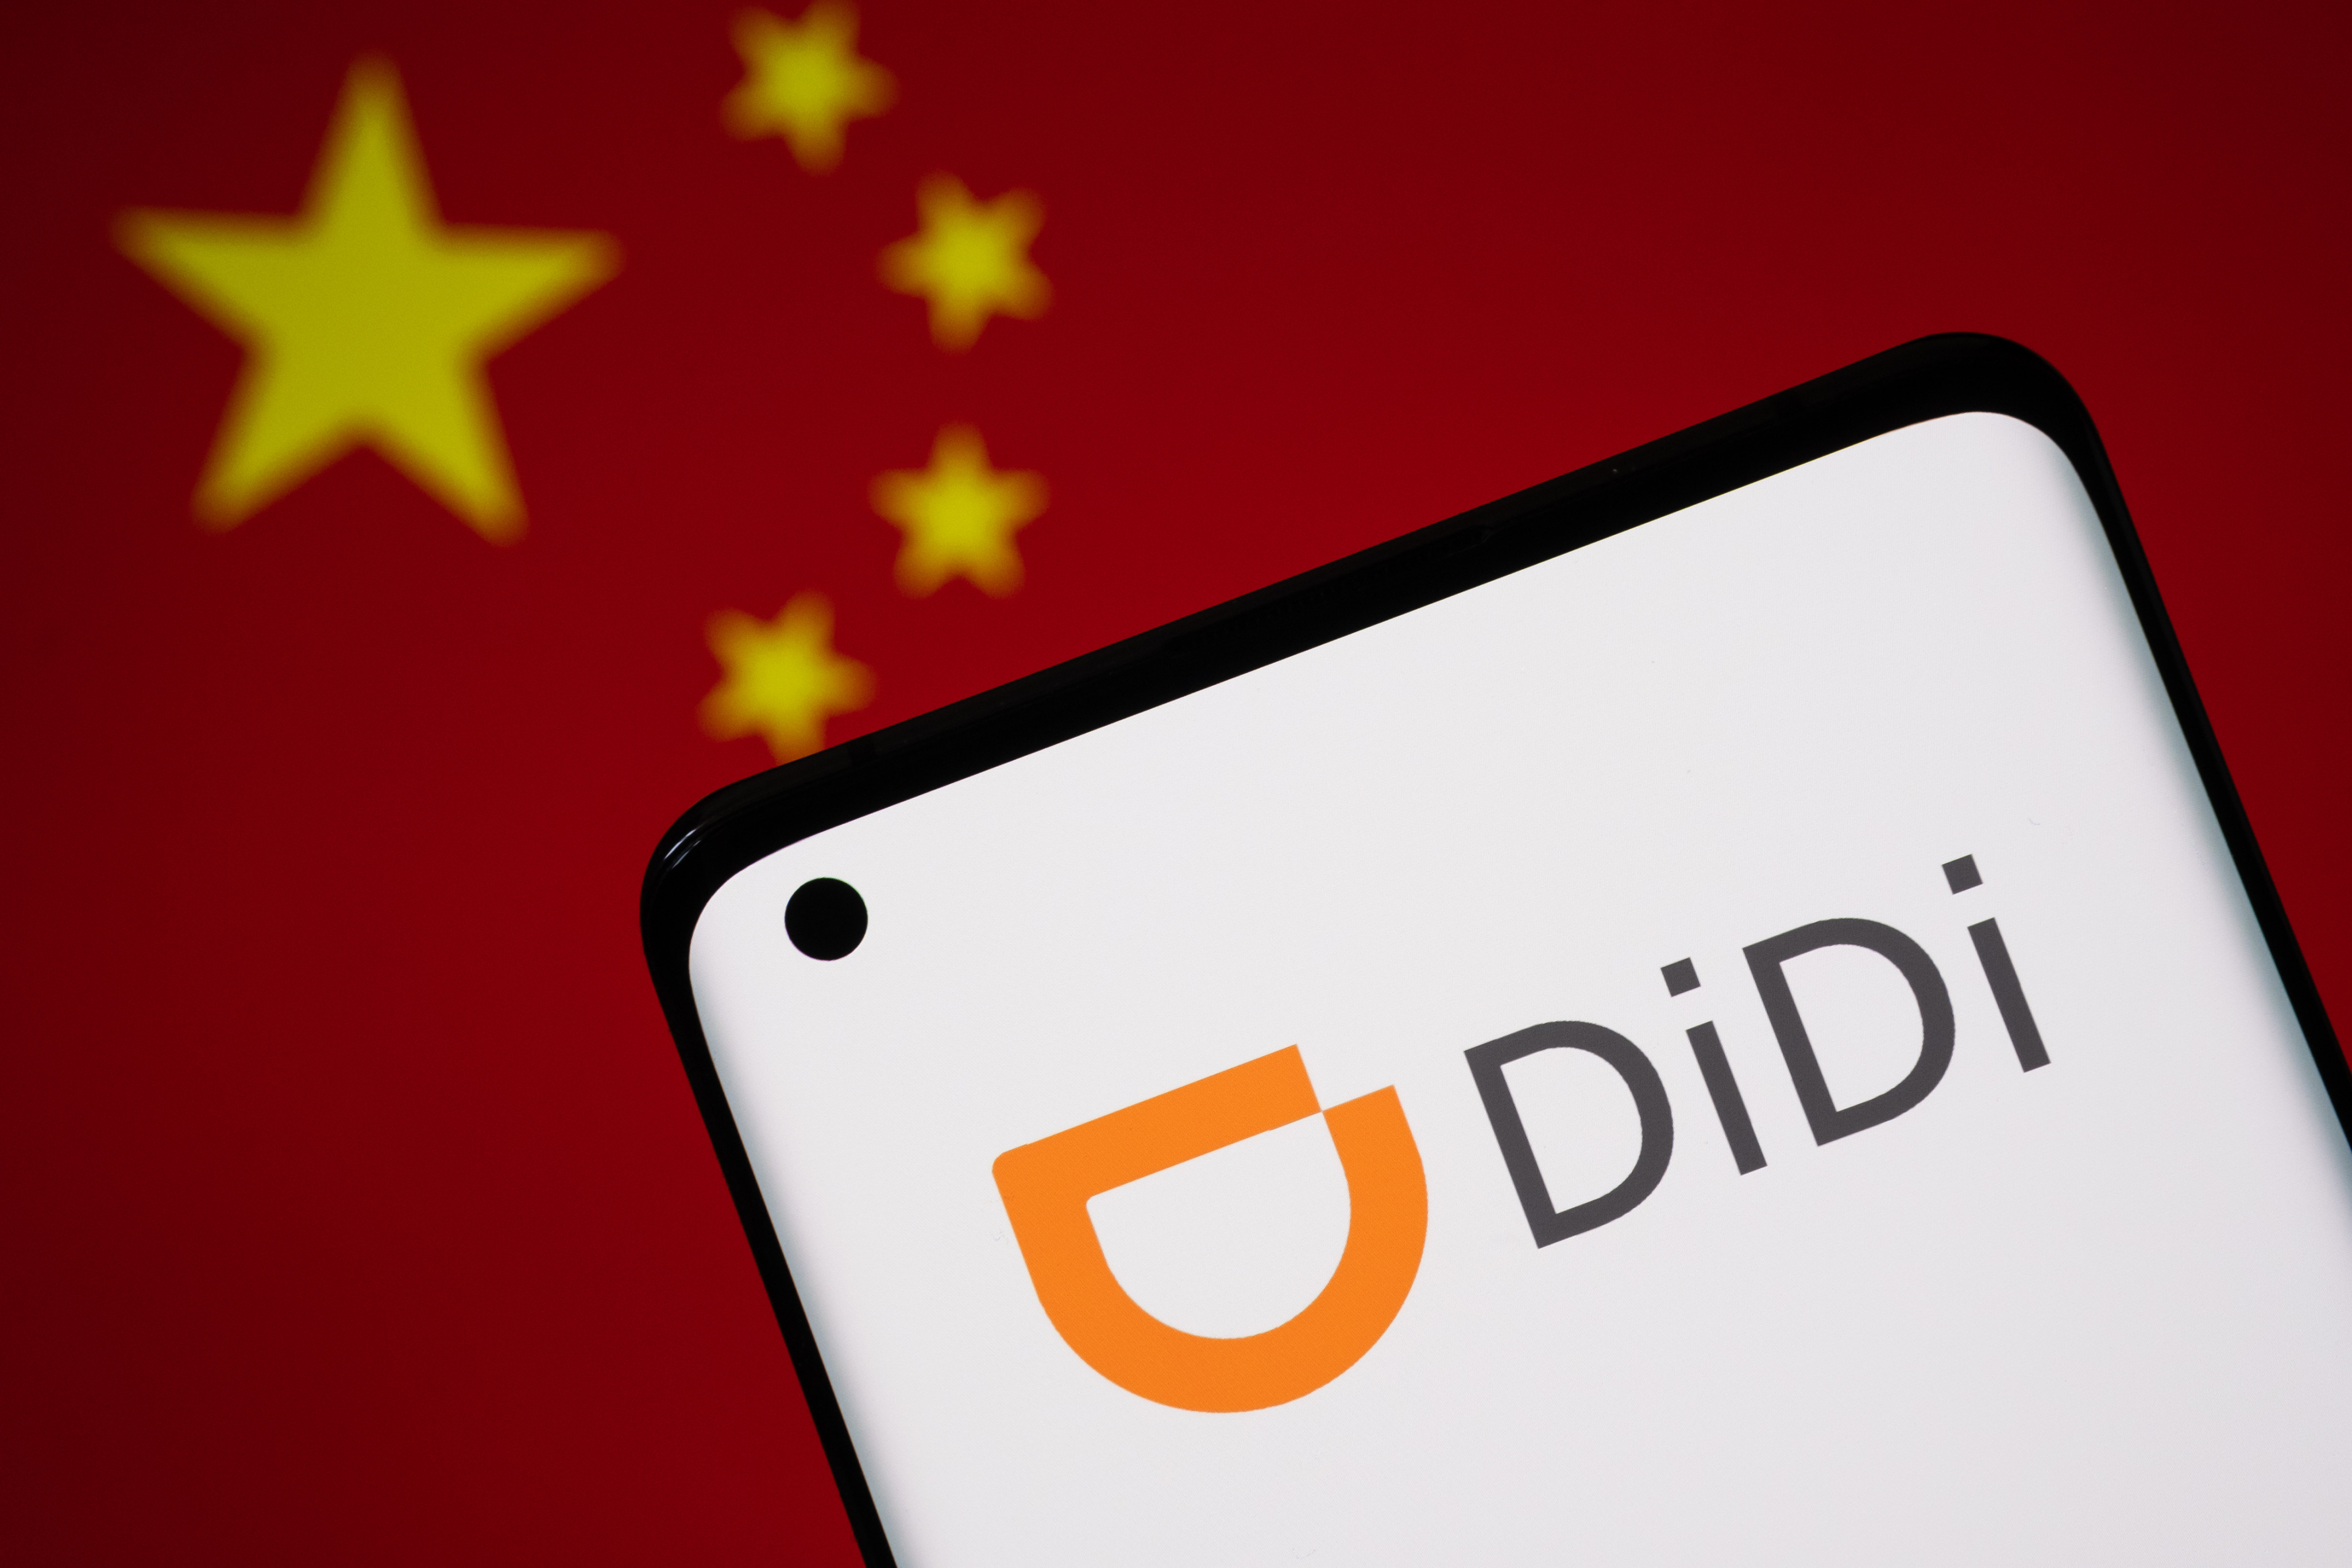 Didi’s logo seen on a smartphone with a Chinese flag in the background. Photo: Shutterstock Images